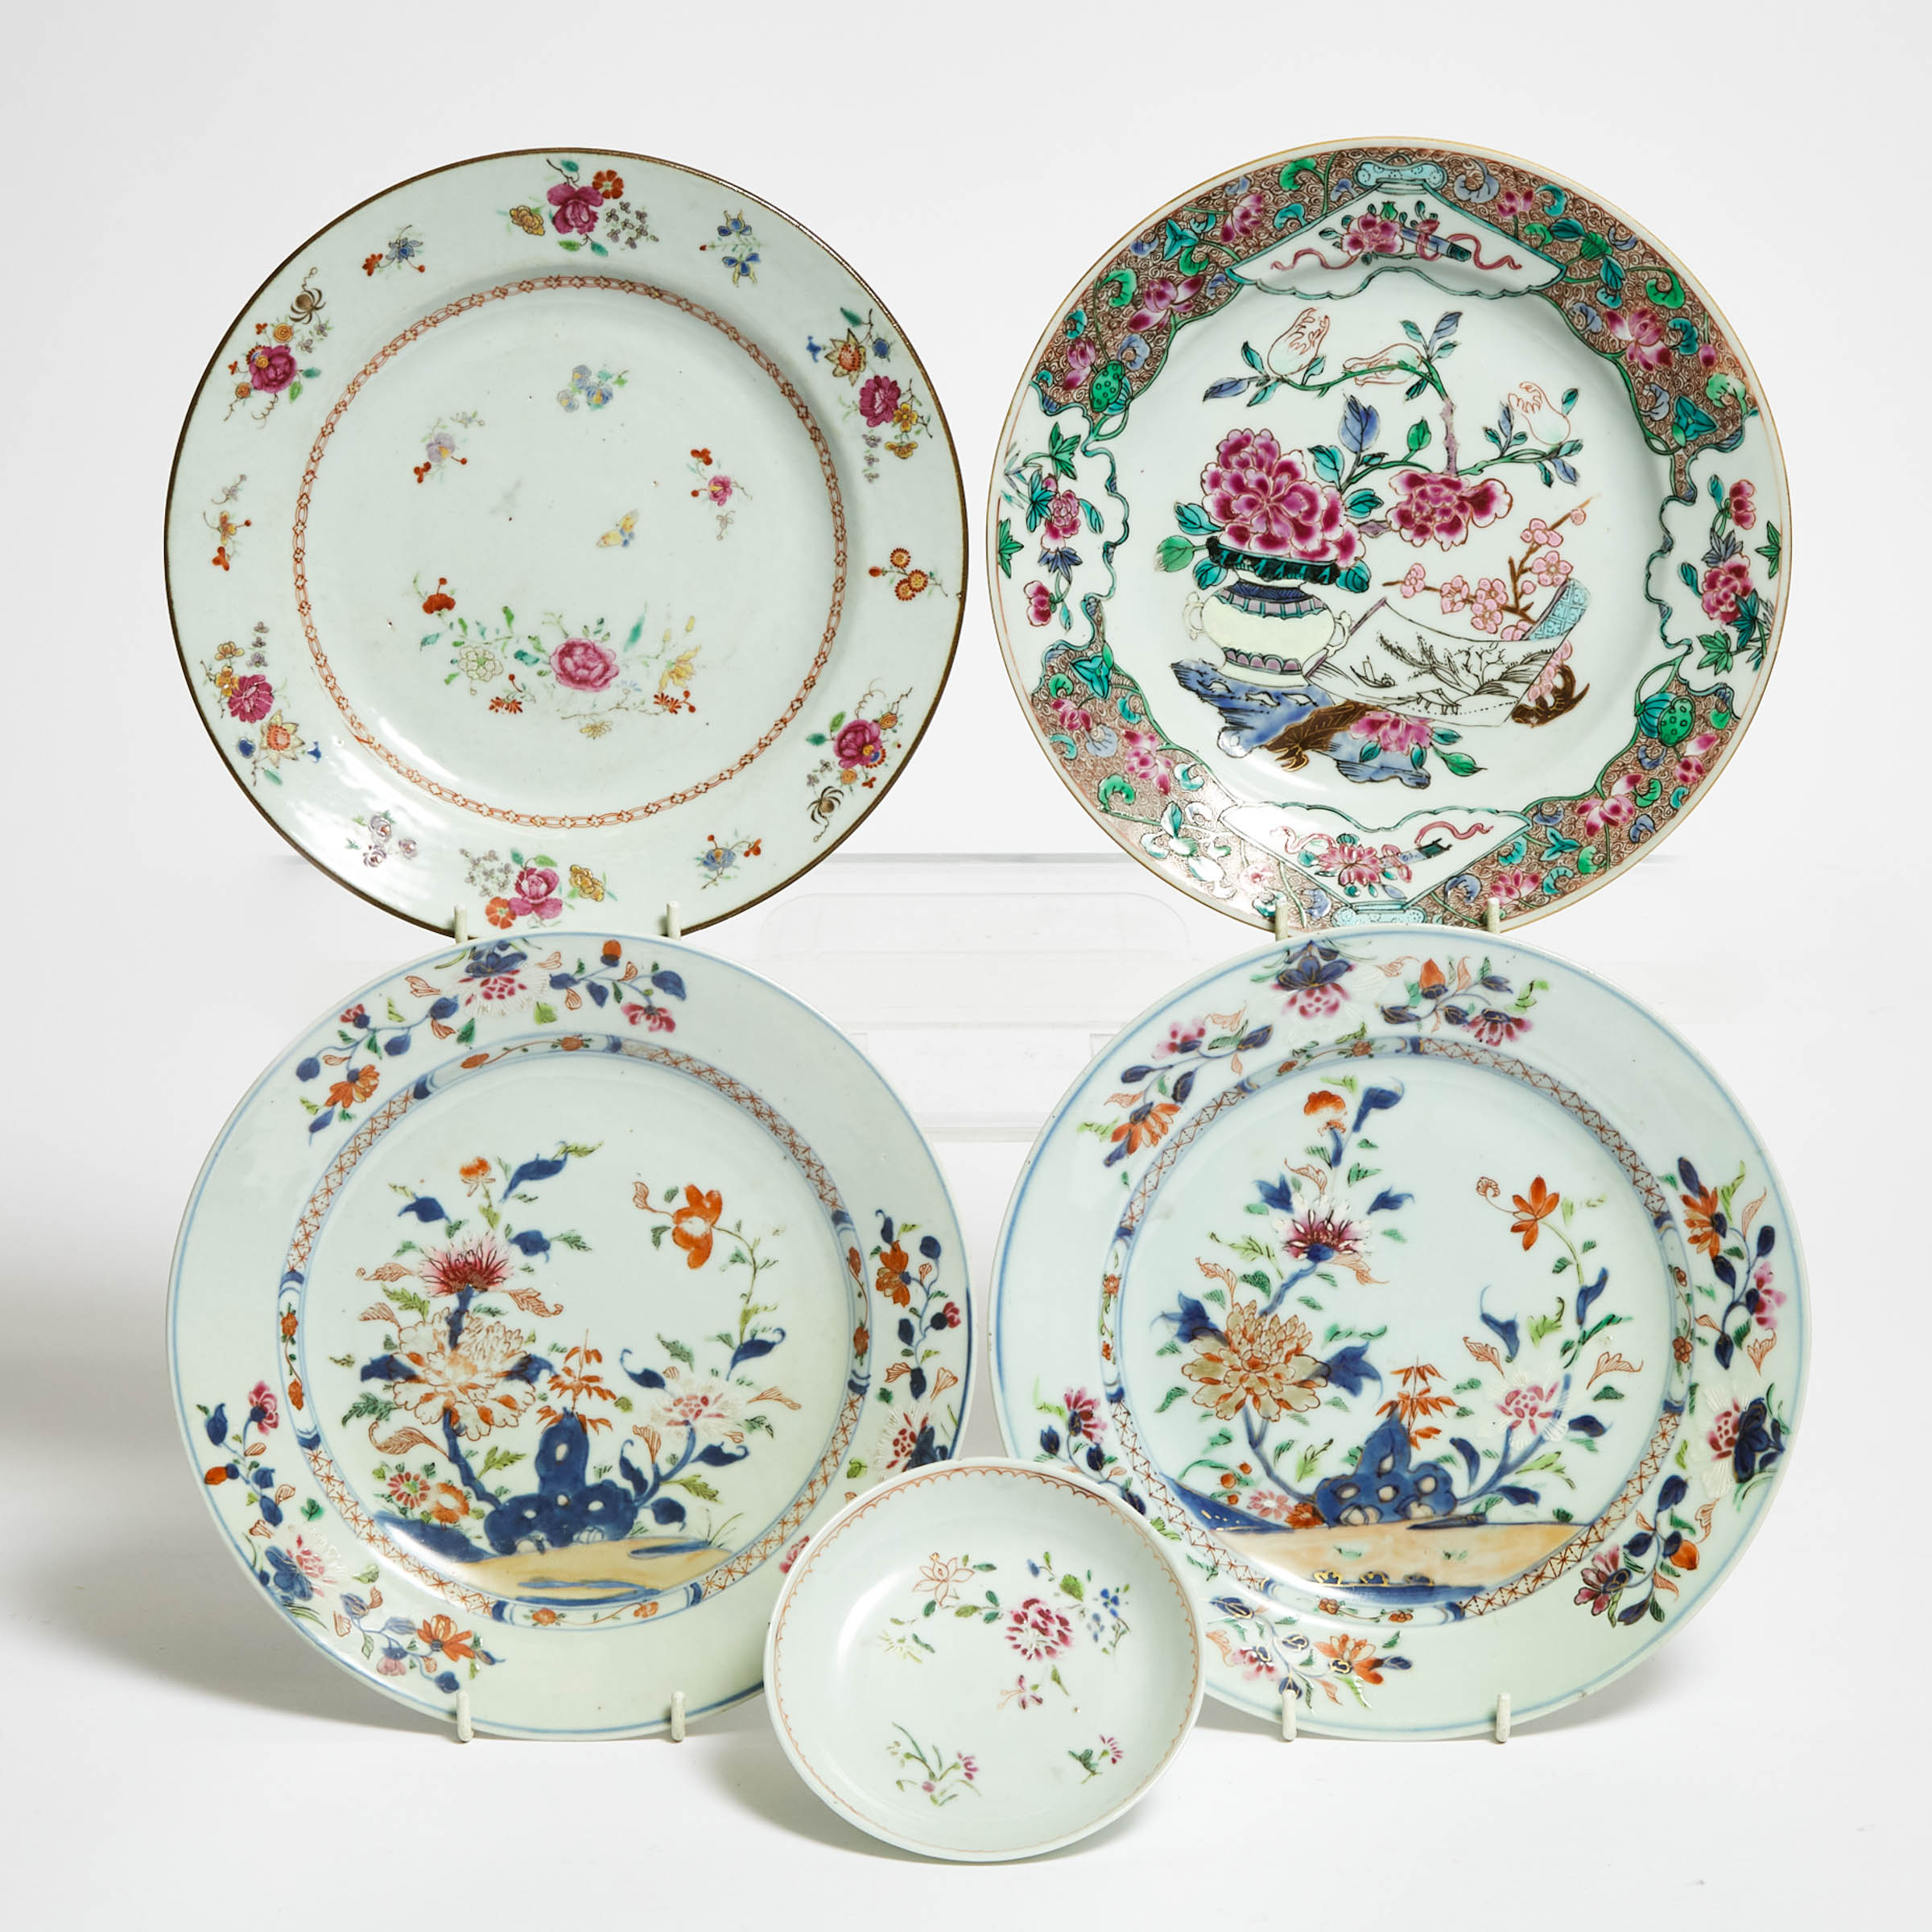 A Group of Five Chinese Export Famille Rose Dishes, 18th Century